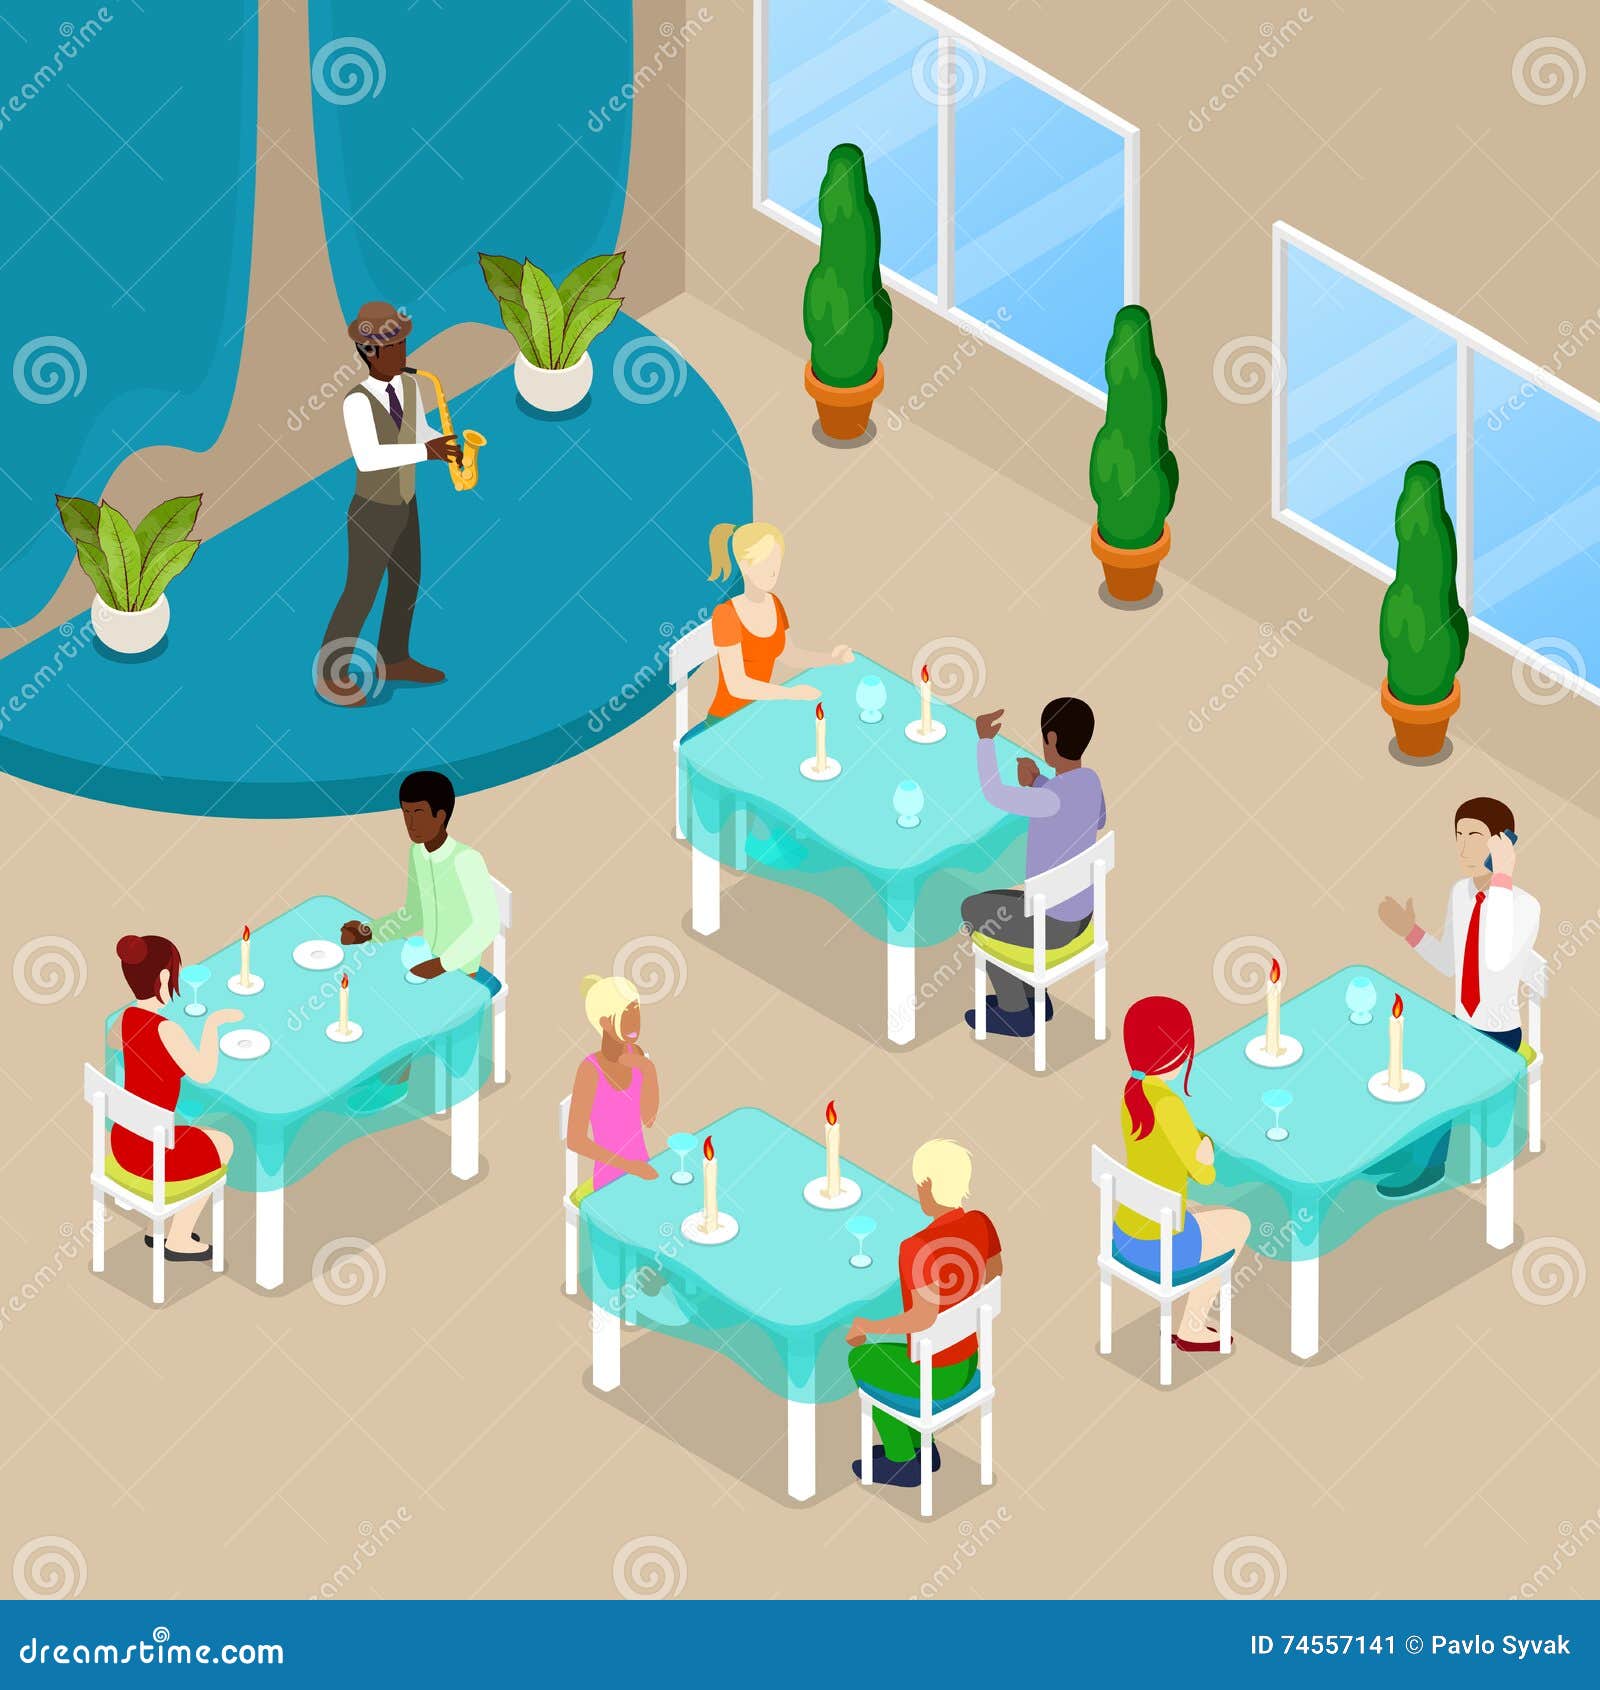 Image result for persons eating in a restaurant cartoon images